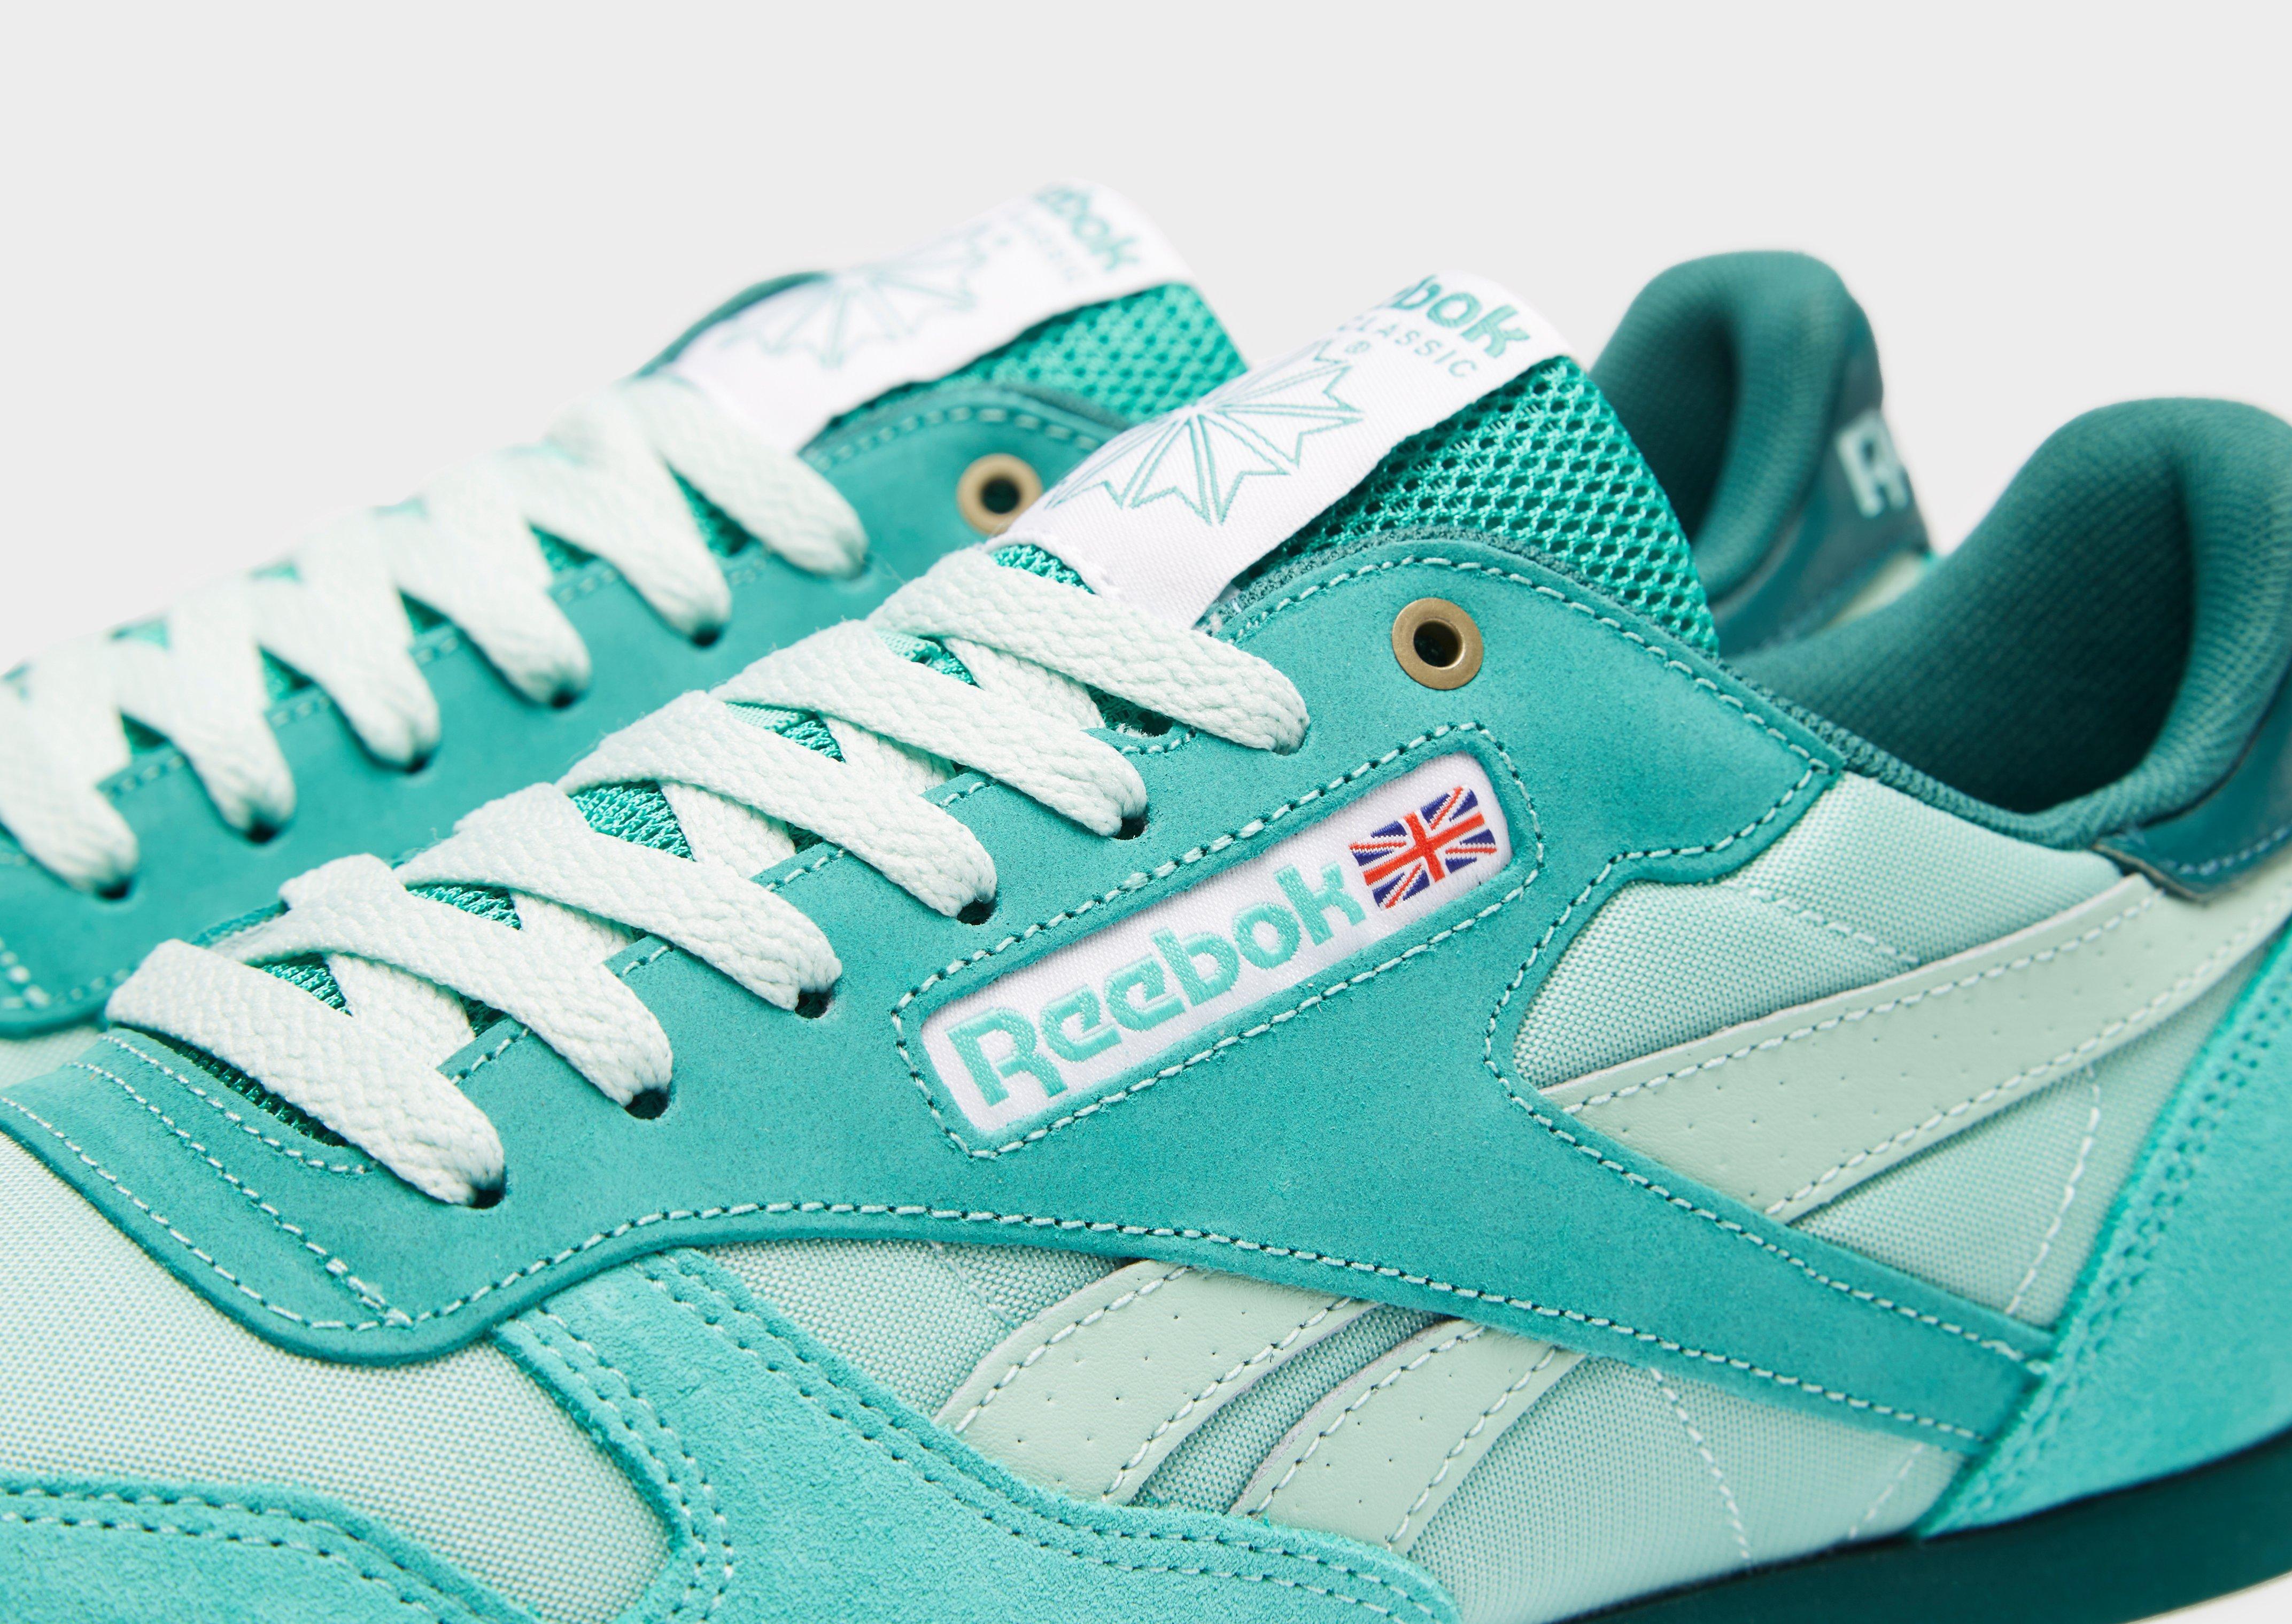 Reebok Classic Leather Mcc in Green for Men - Lyst